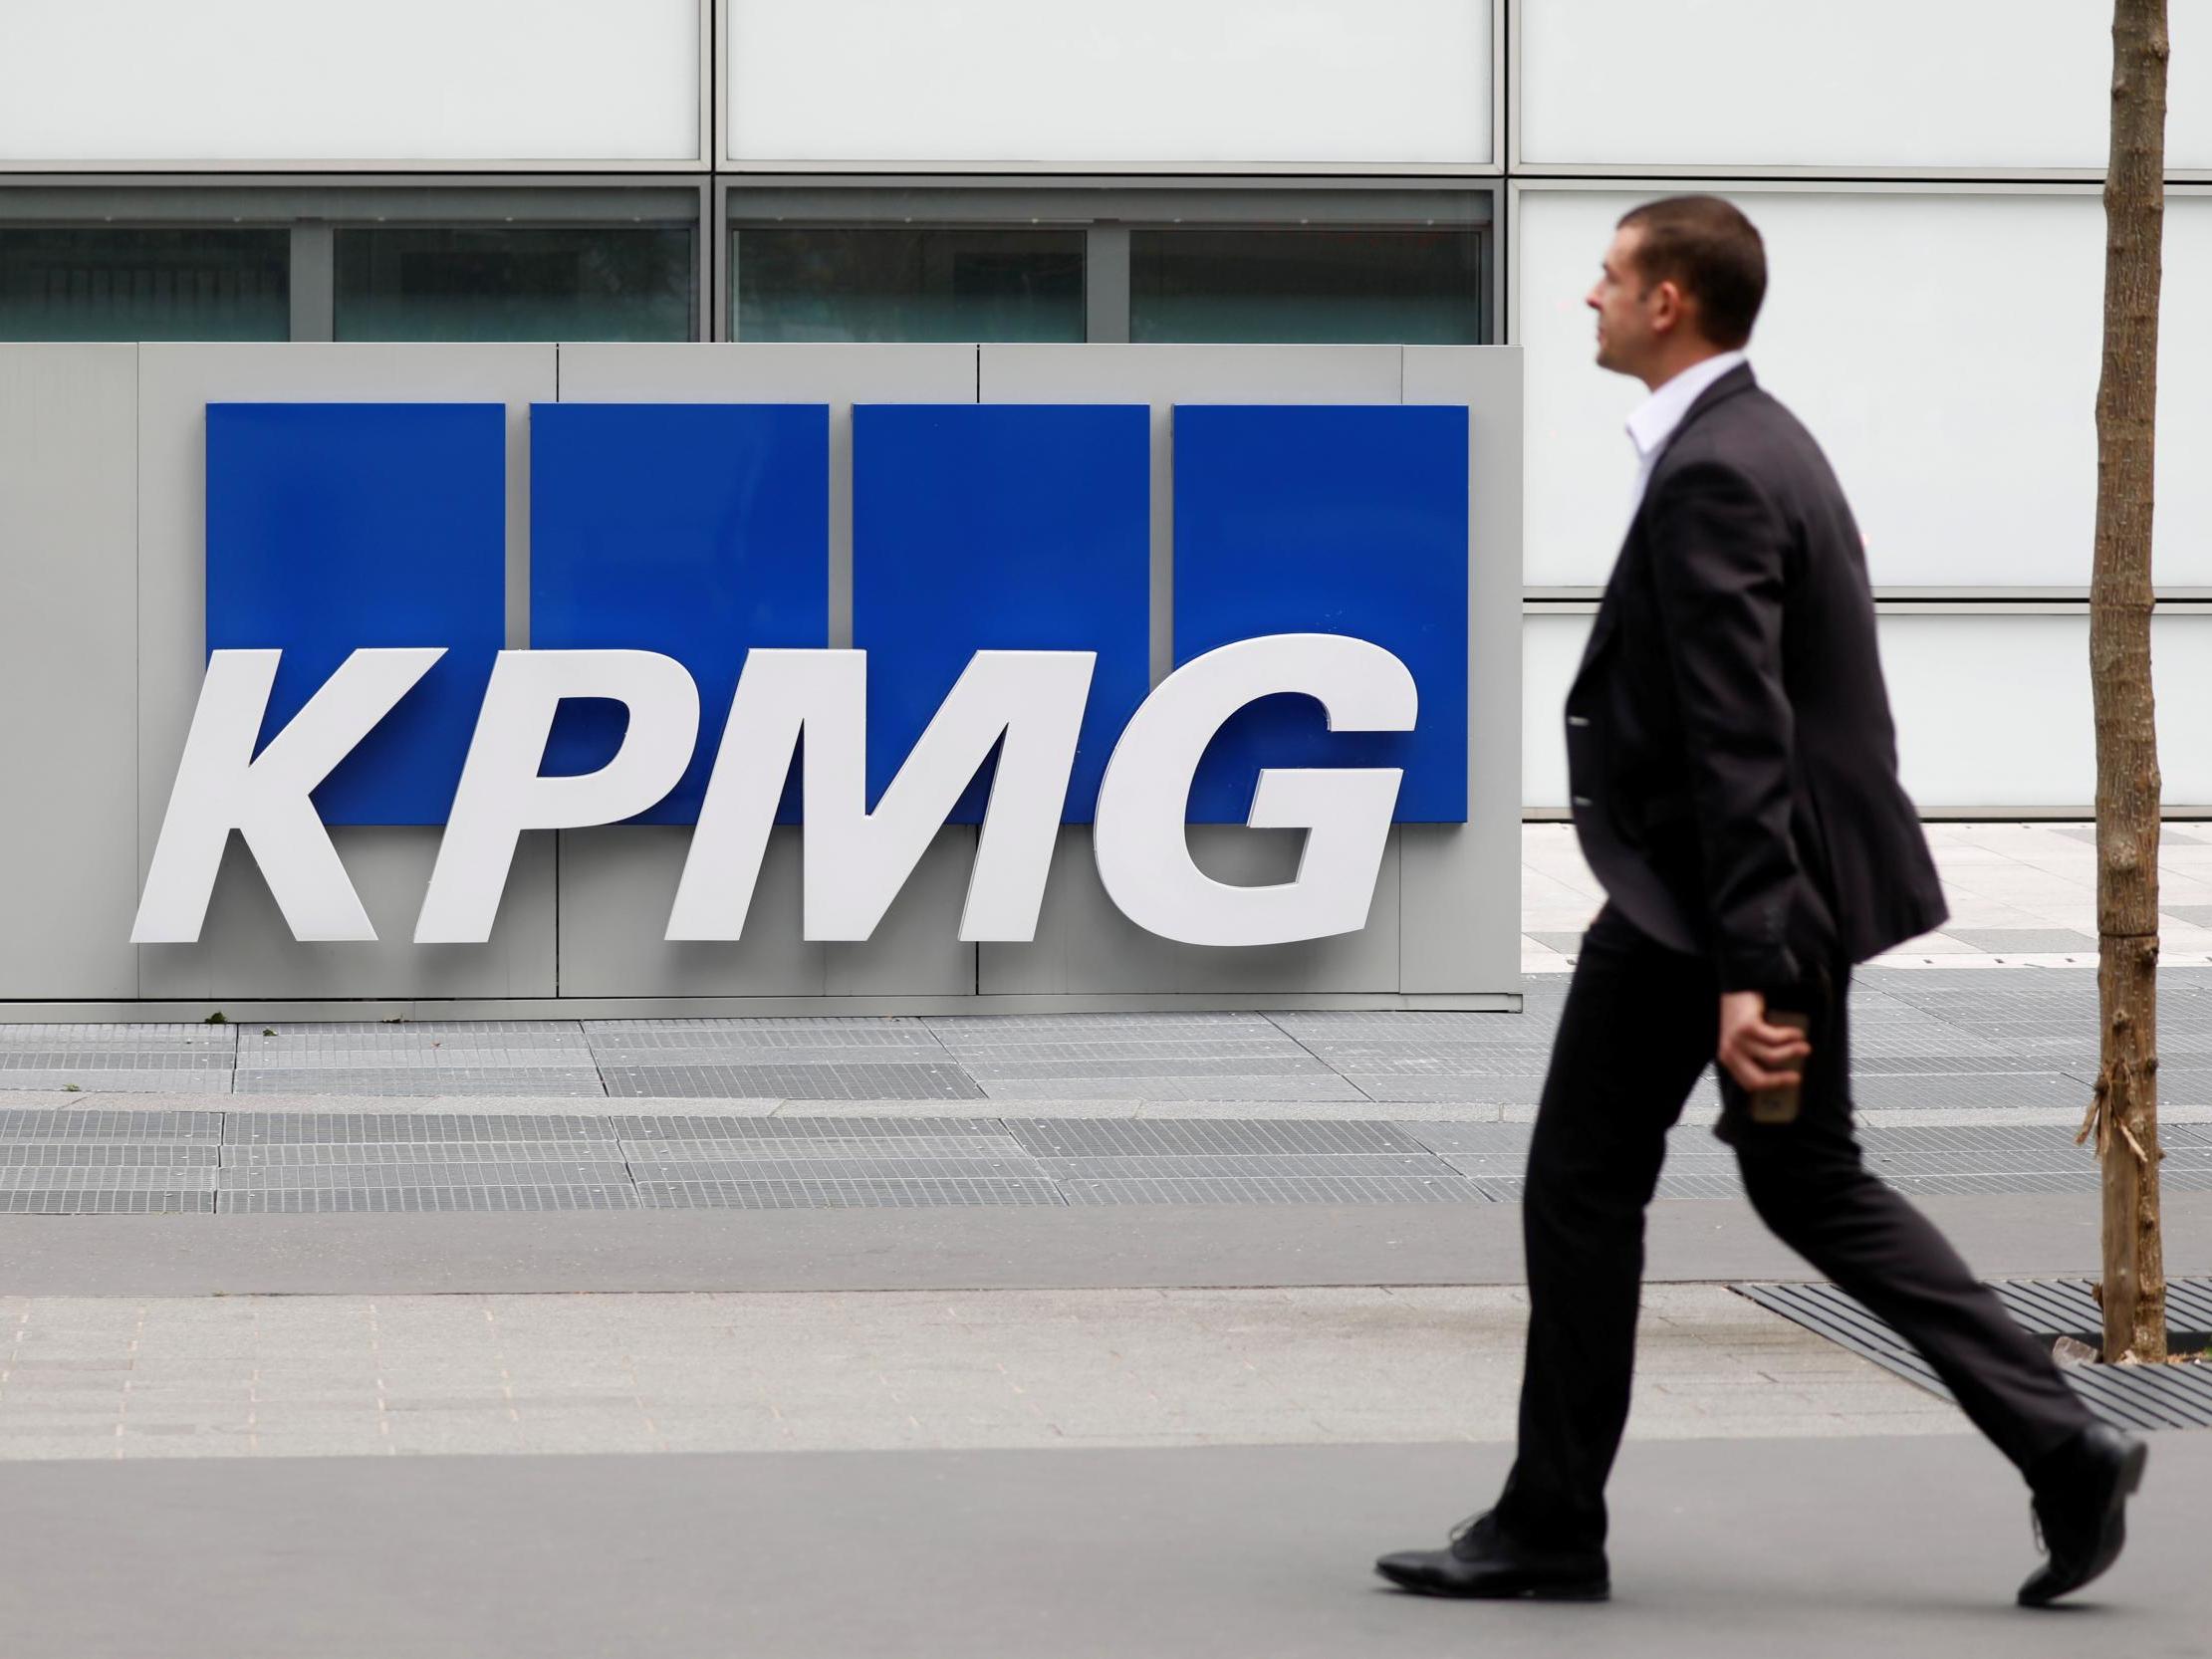 KPMG: The big four accountancy firm is facing an investigation of its audit work for Conviviality